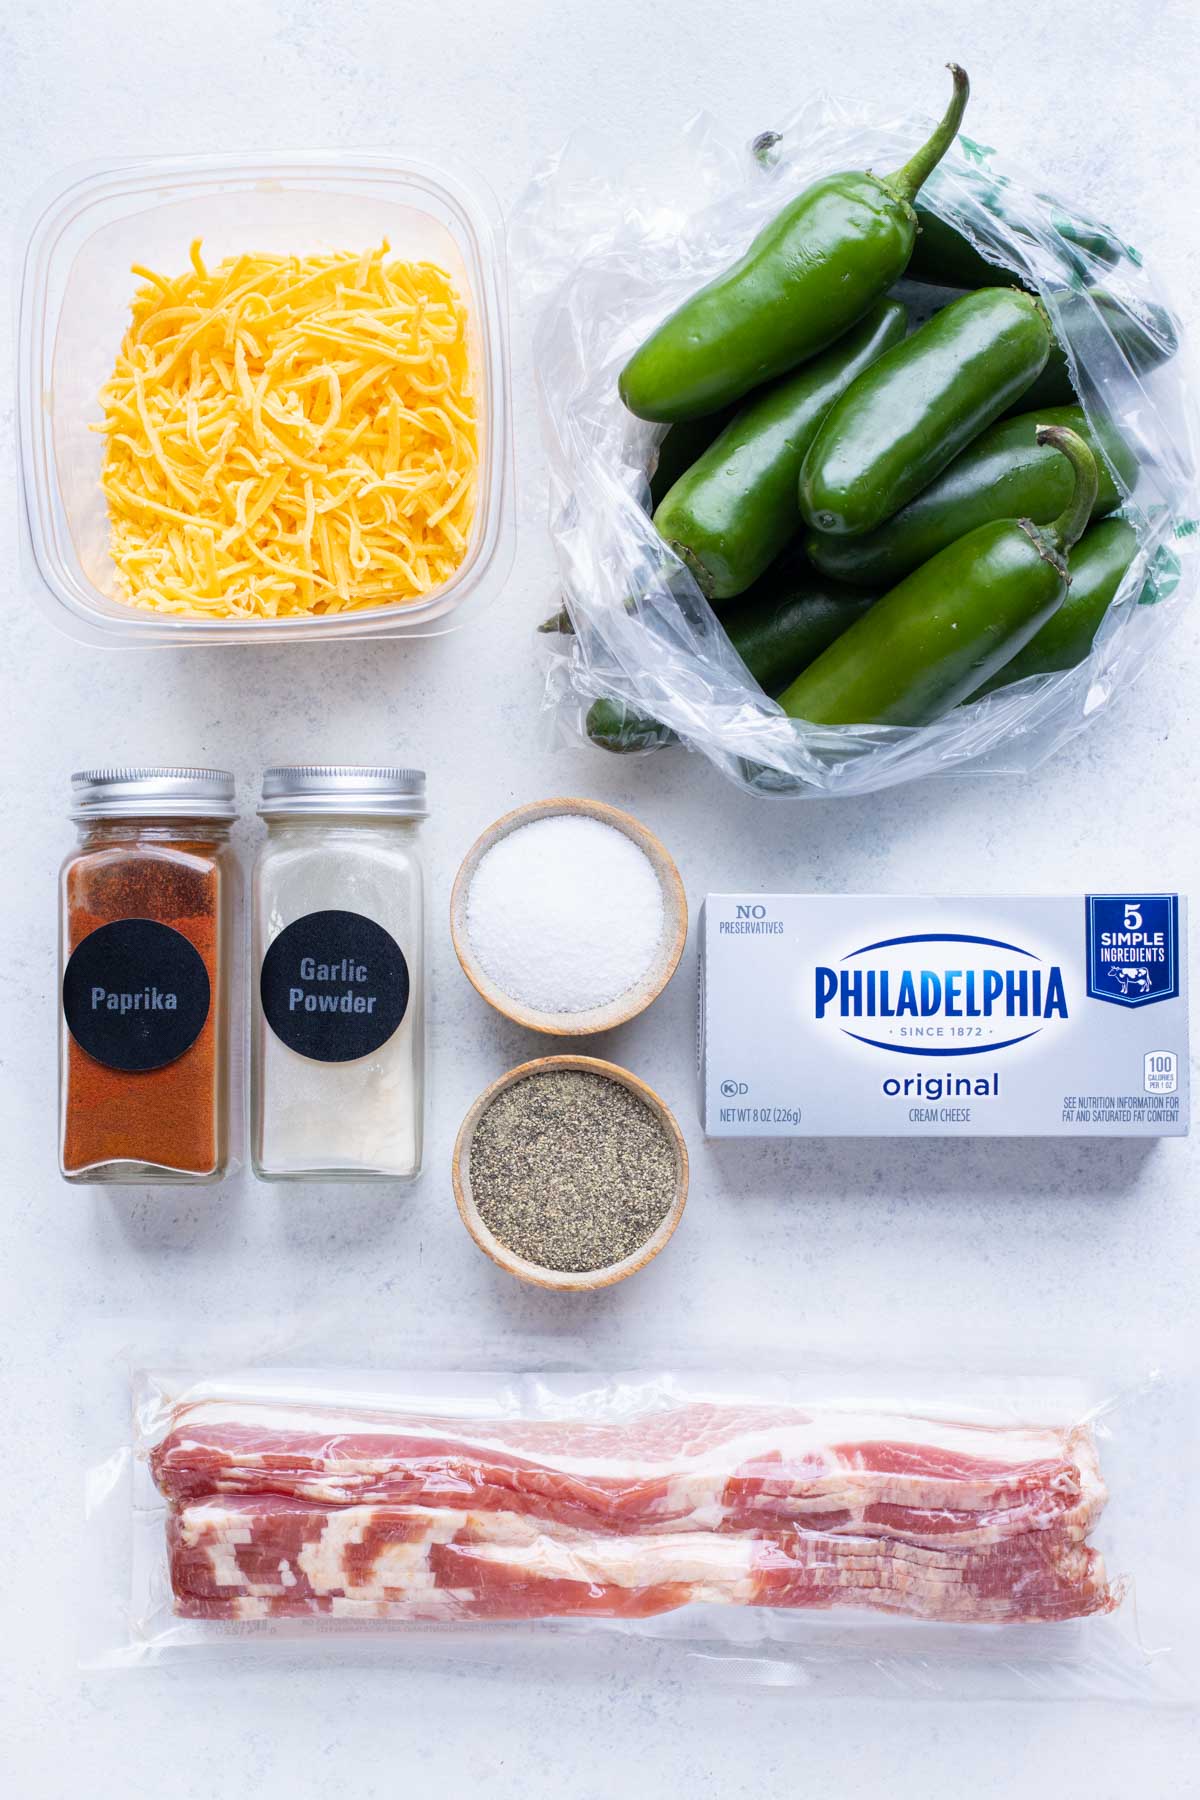 Jalapenos, cheddar cheese, bacon, cream cheese, and seasonings are the ingredients for this recipe.